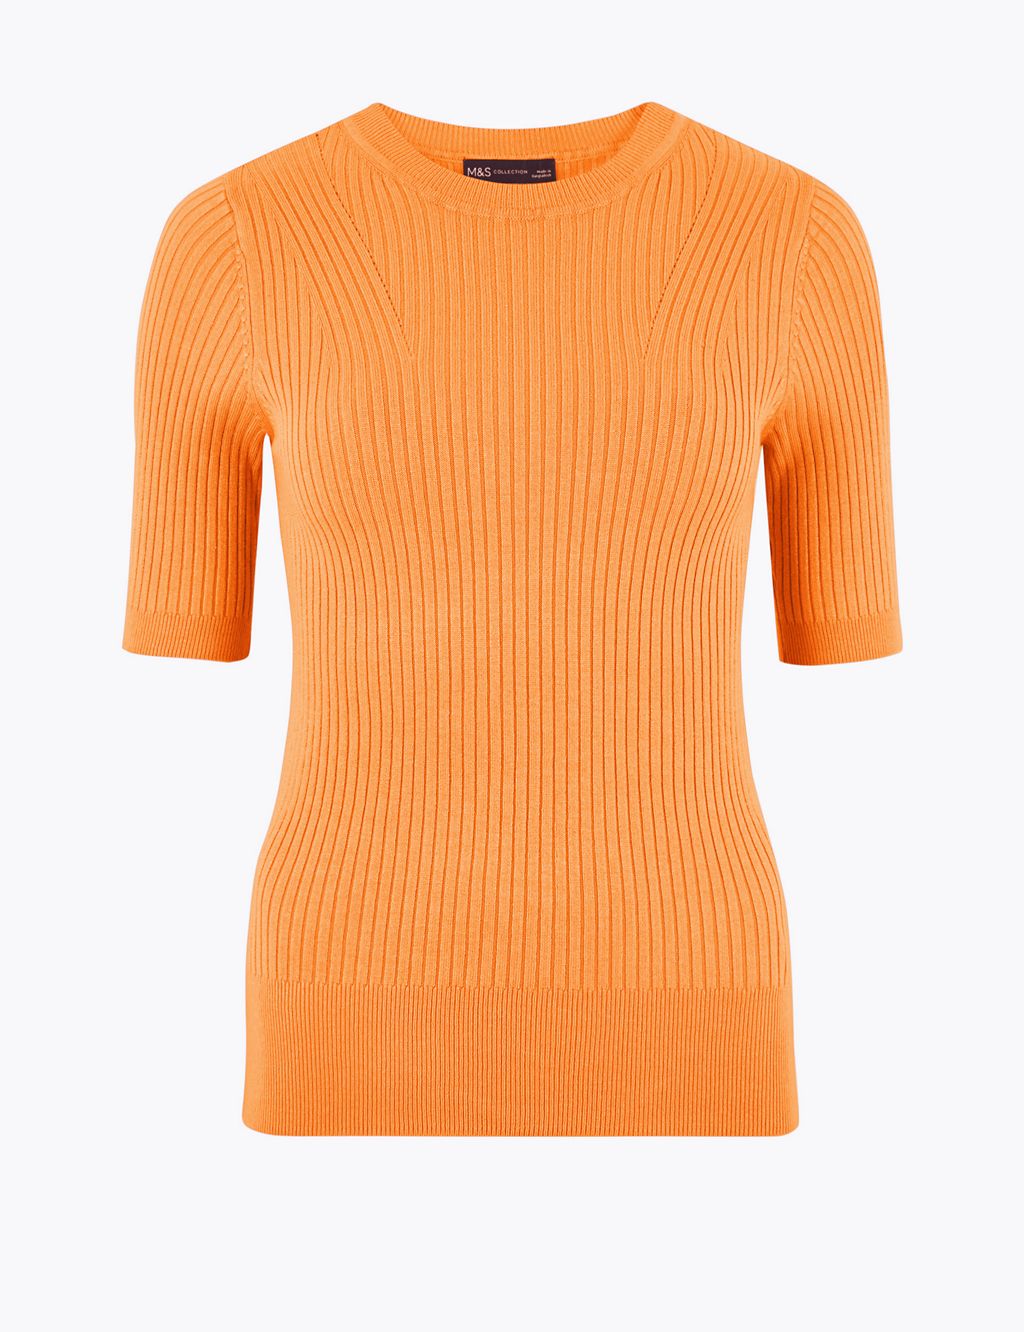 PETITE Ribbed Jumper | M&S Collection | M&S